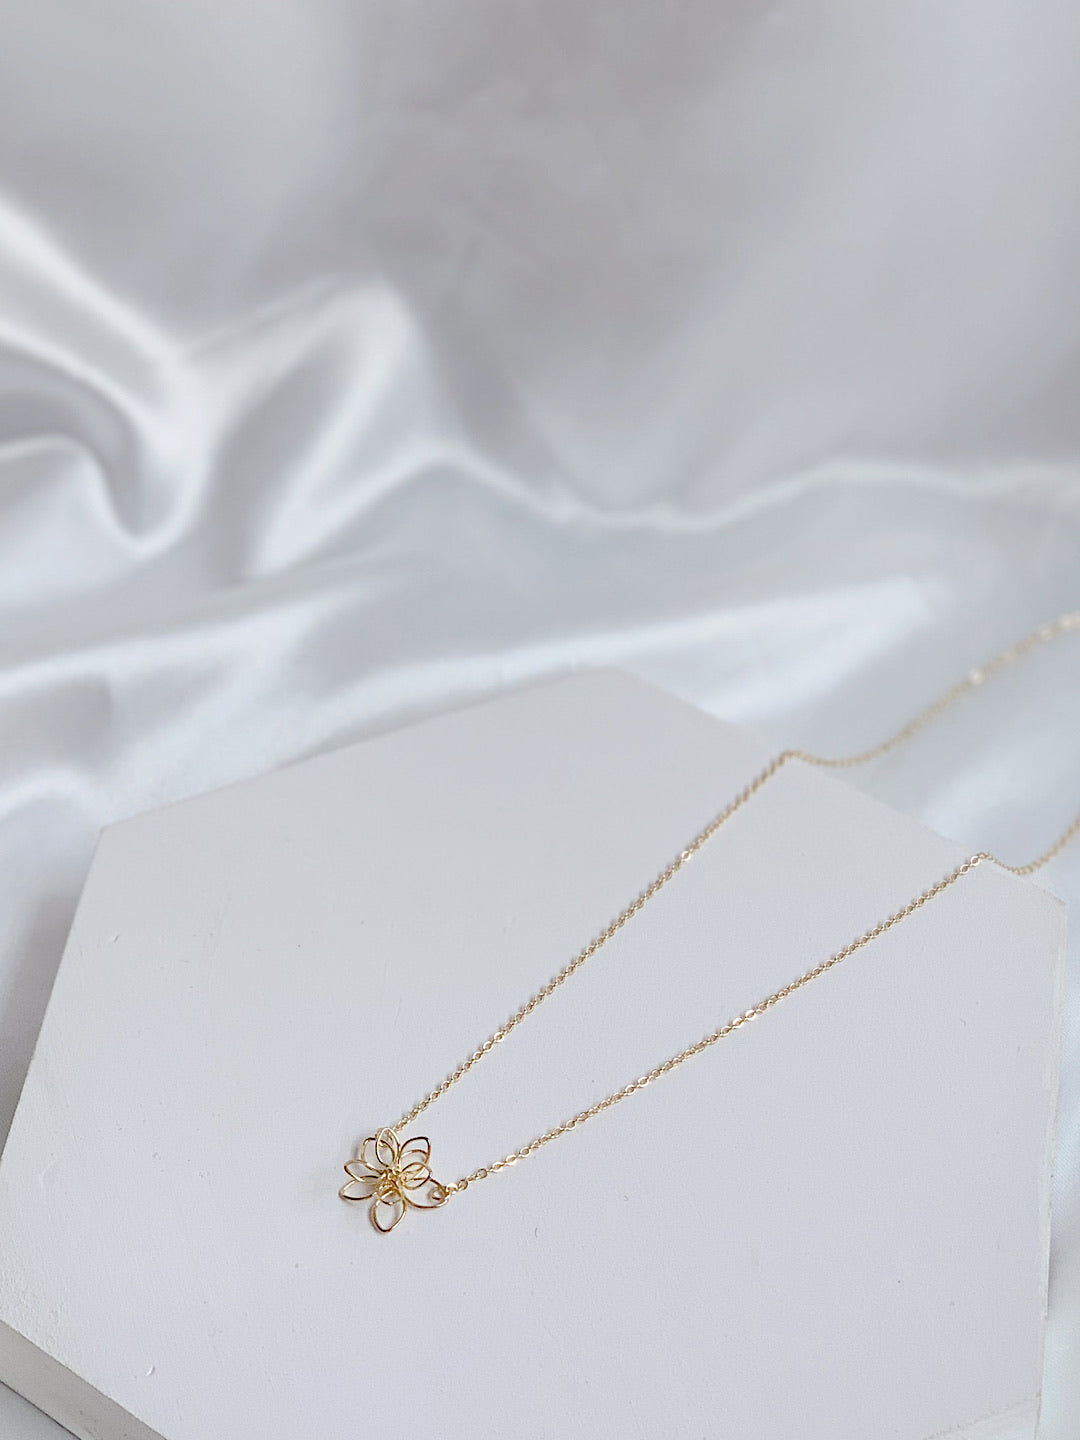 Fleur Necklace, 14k gold-plated (made to order)